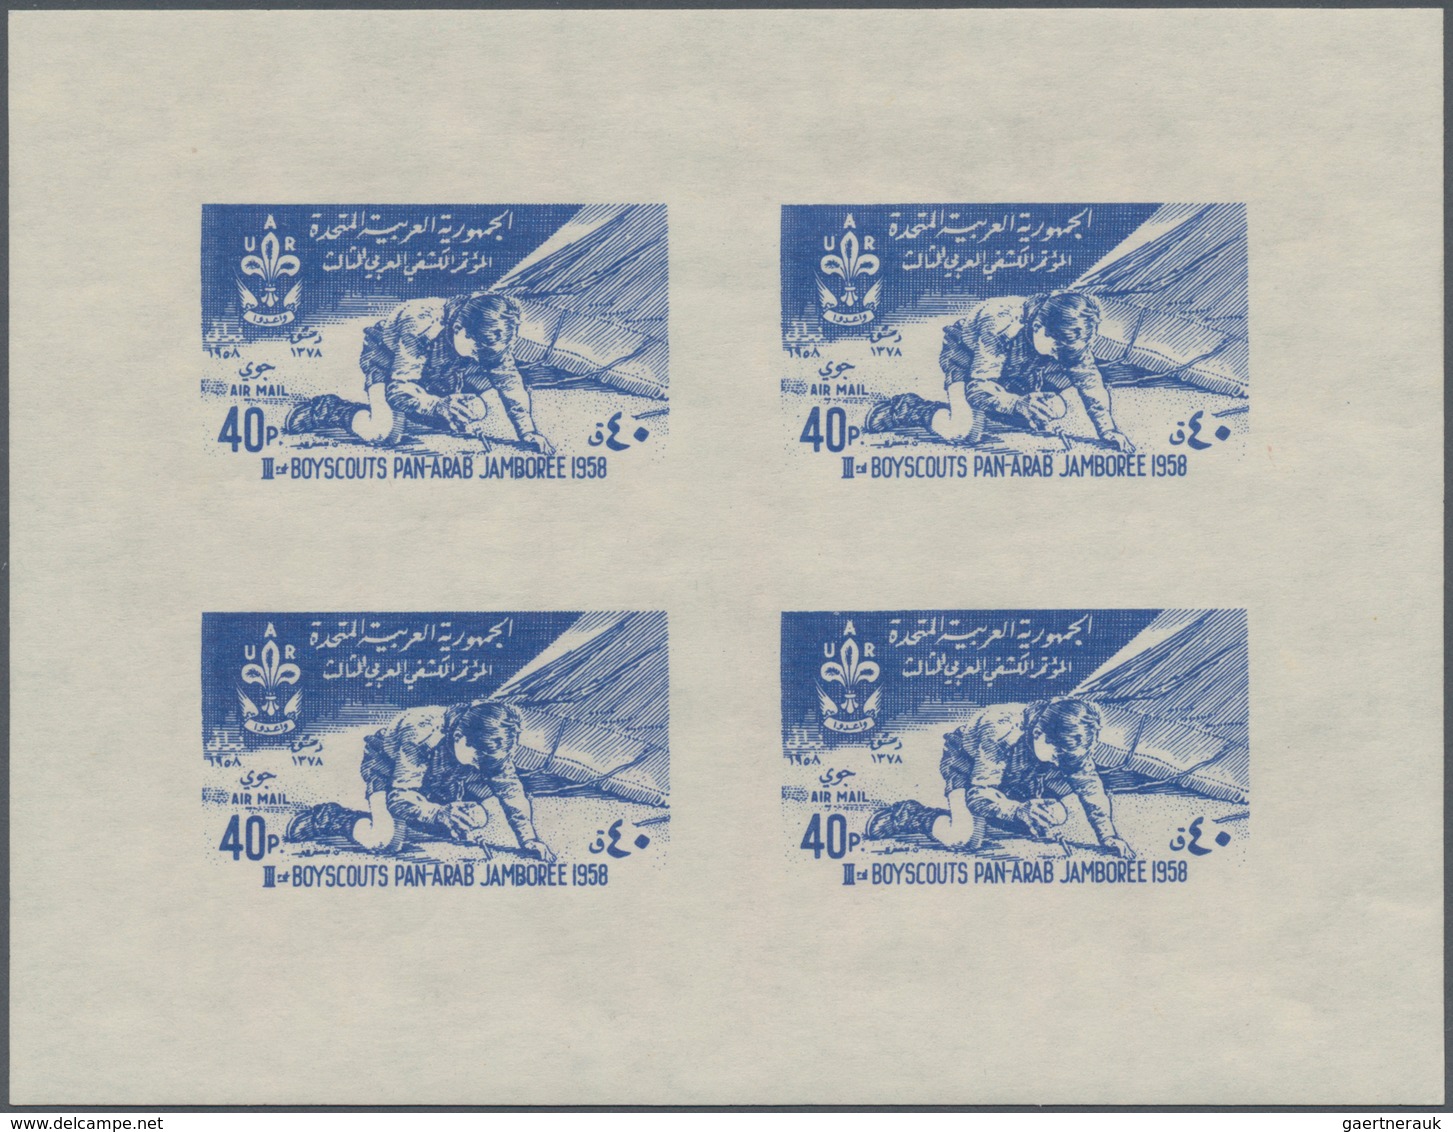 Syrien: 1958, UAR Issues, MNH Holding Of 146 Imperforate De Luxe Sheets: Foundation Of UAR (Michel N - Siria